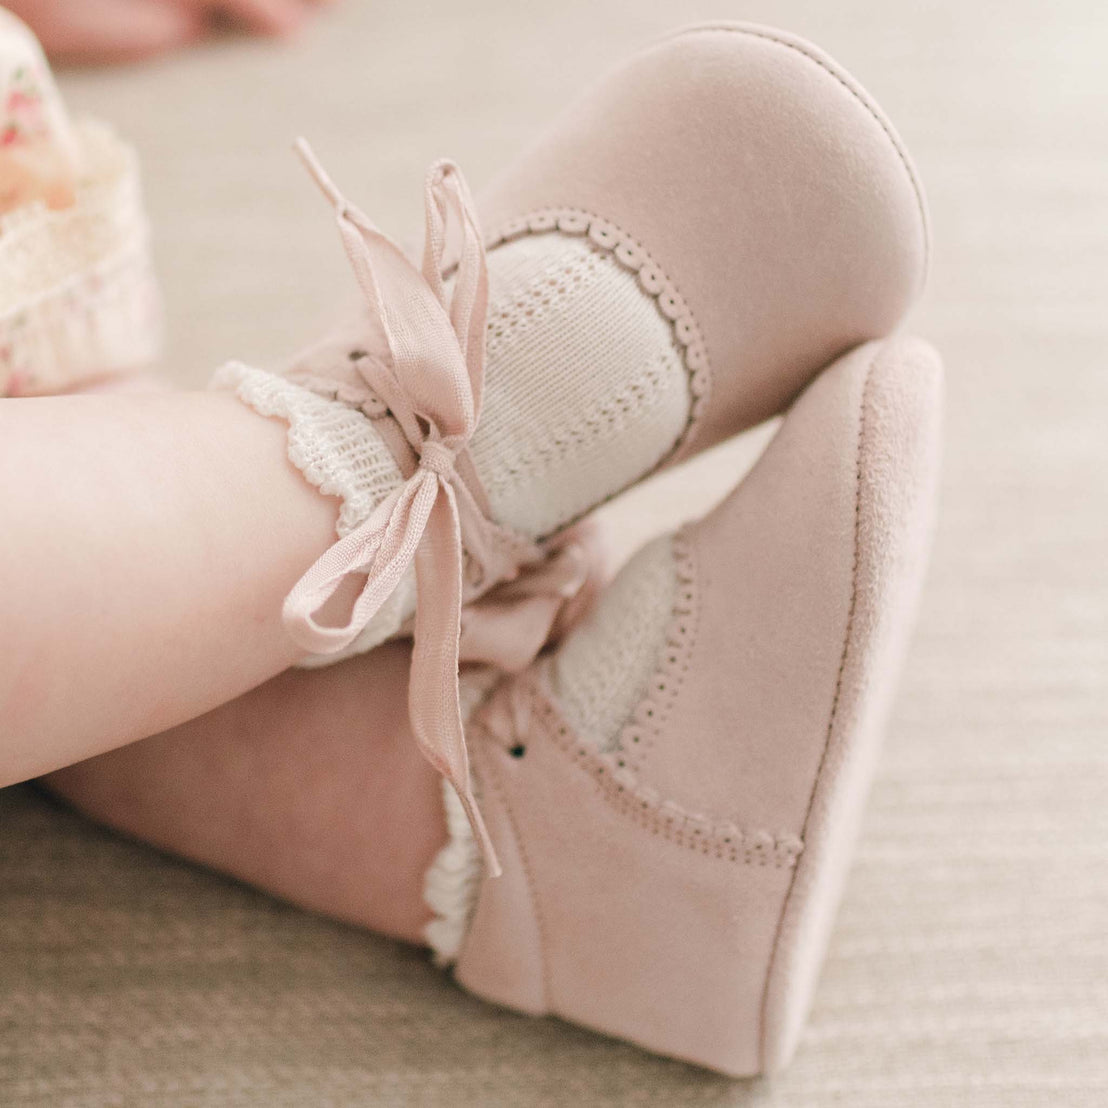 Close-up of a baby's feet wearing Thea Suede Tie Mary Janes with ribbon ties and white frilly socks, resting on a soft surface for their first birthday dress.